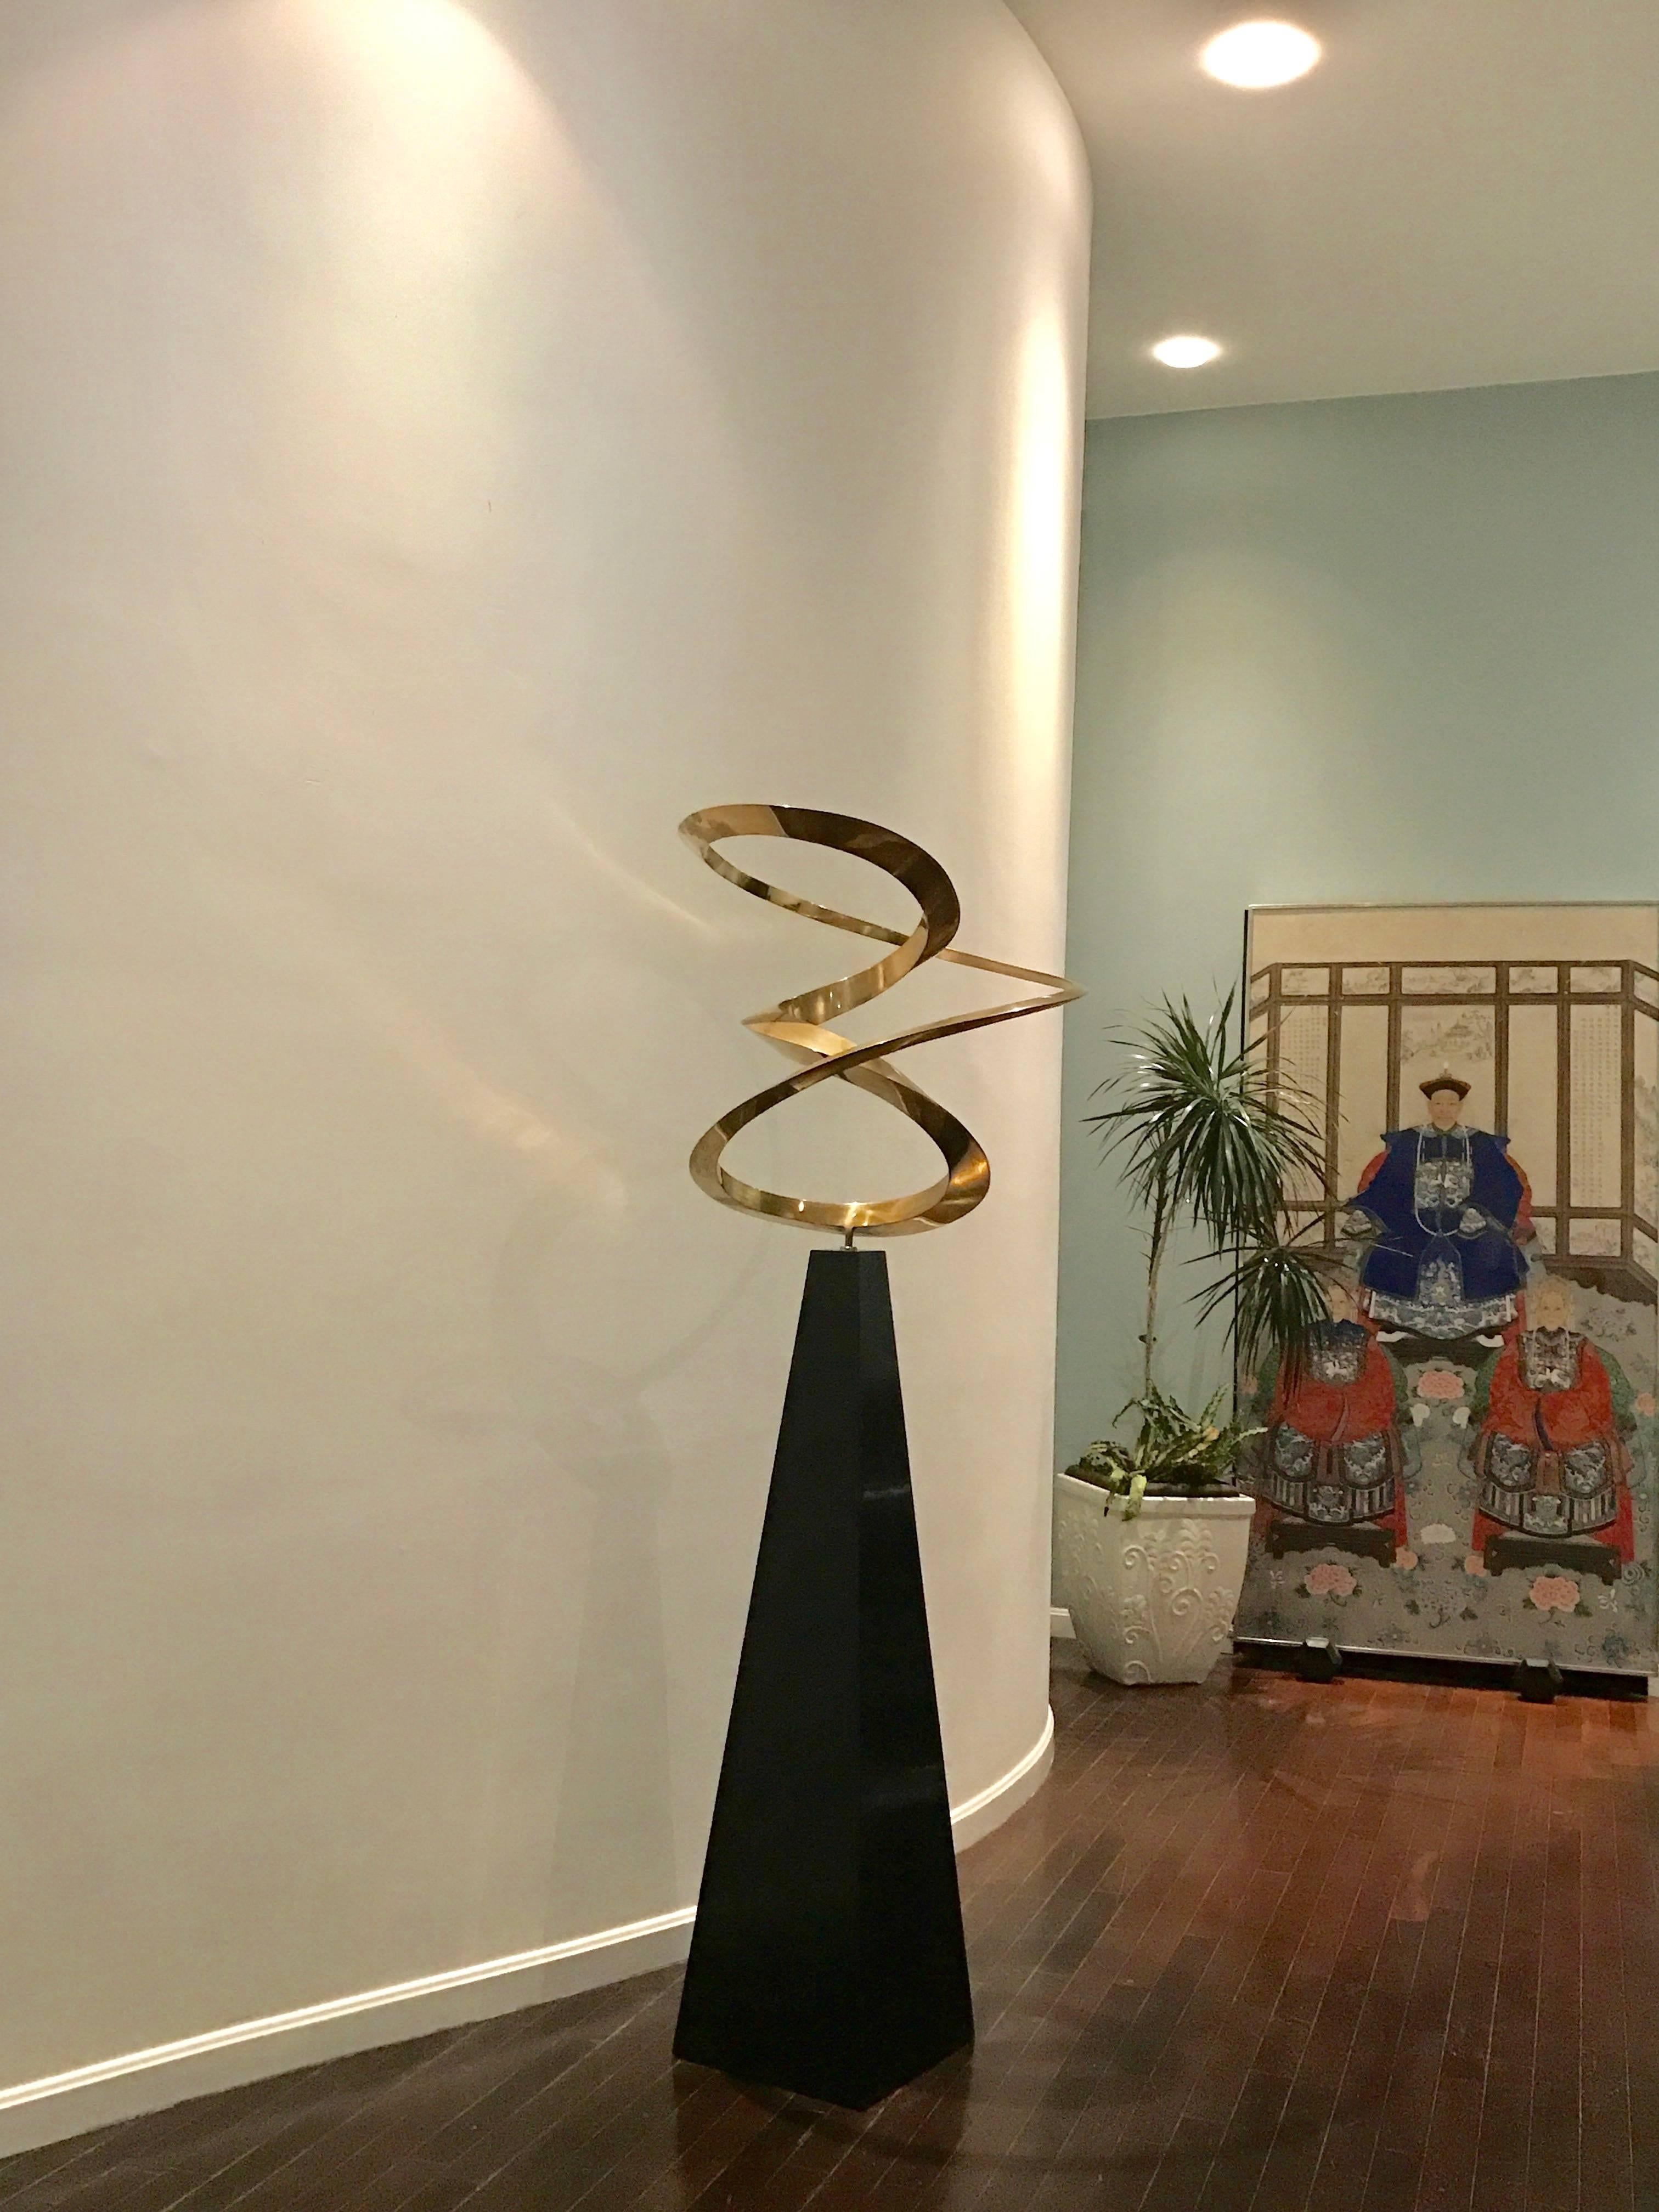 This Beautiful gold-tone Metal Spiral Sculpture rotating on a black lacquered wooden base is by Robert Perless (American B. 1938),  who is known for Kinetic Art. His work is represented in Major Institutions, Airports and Museums including the